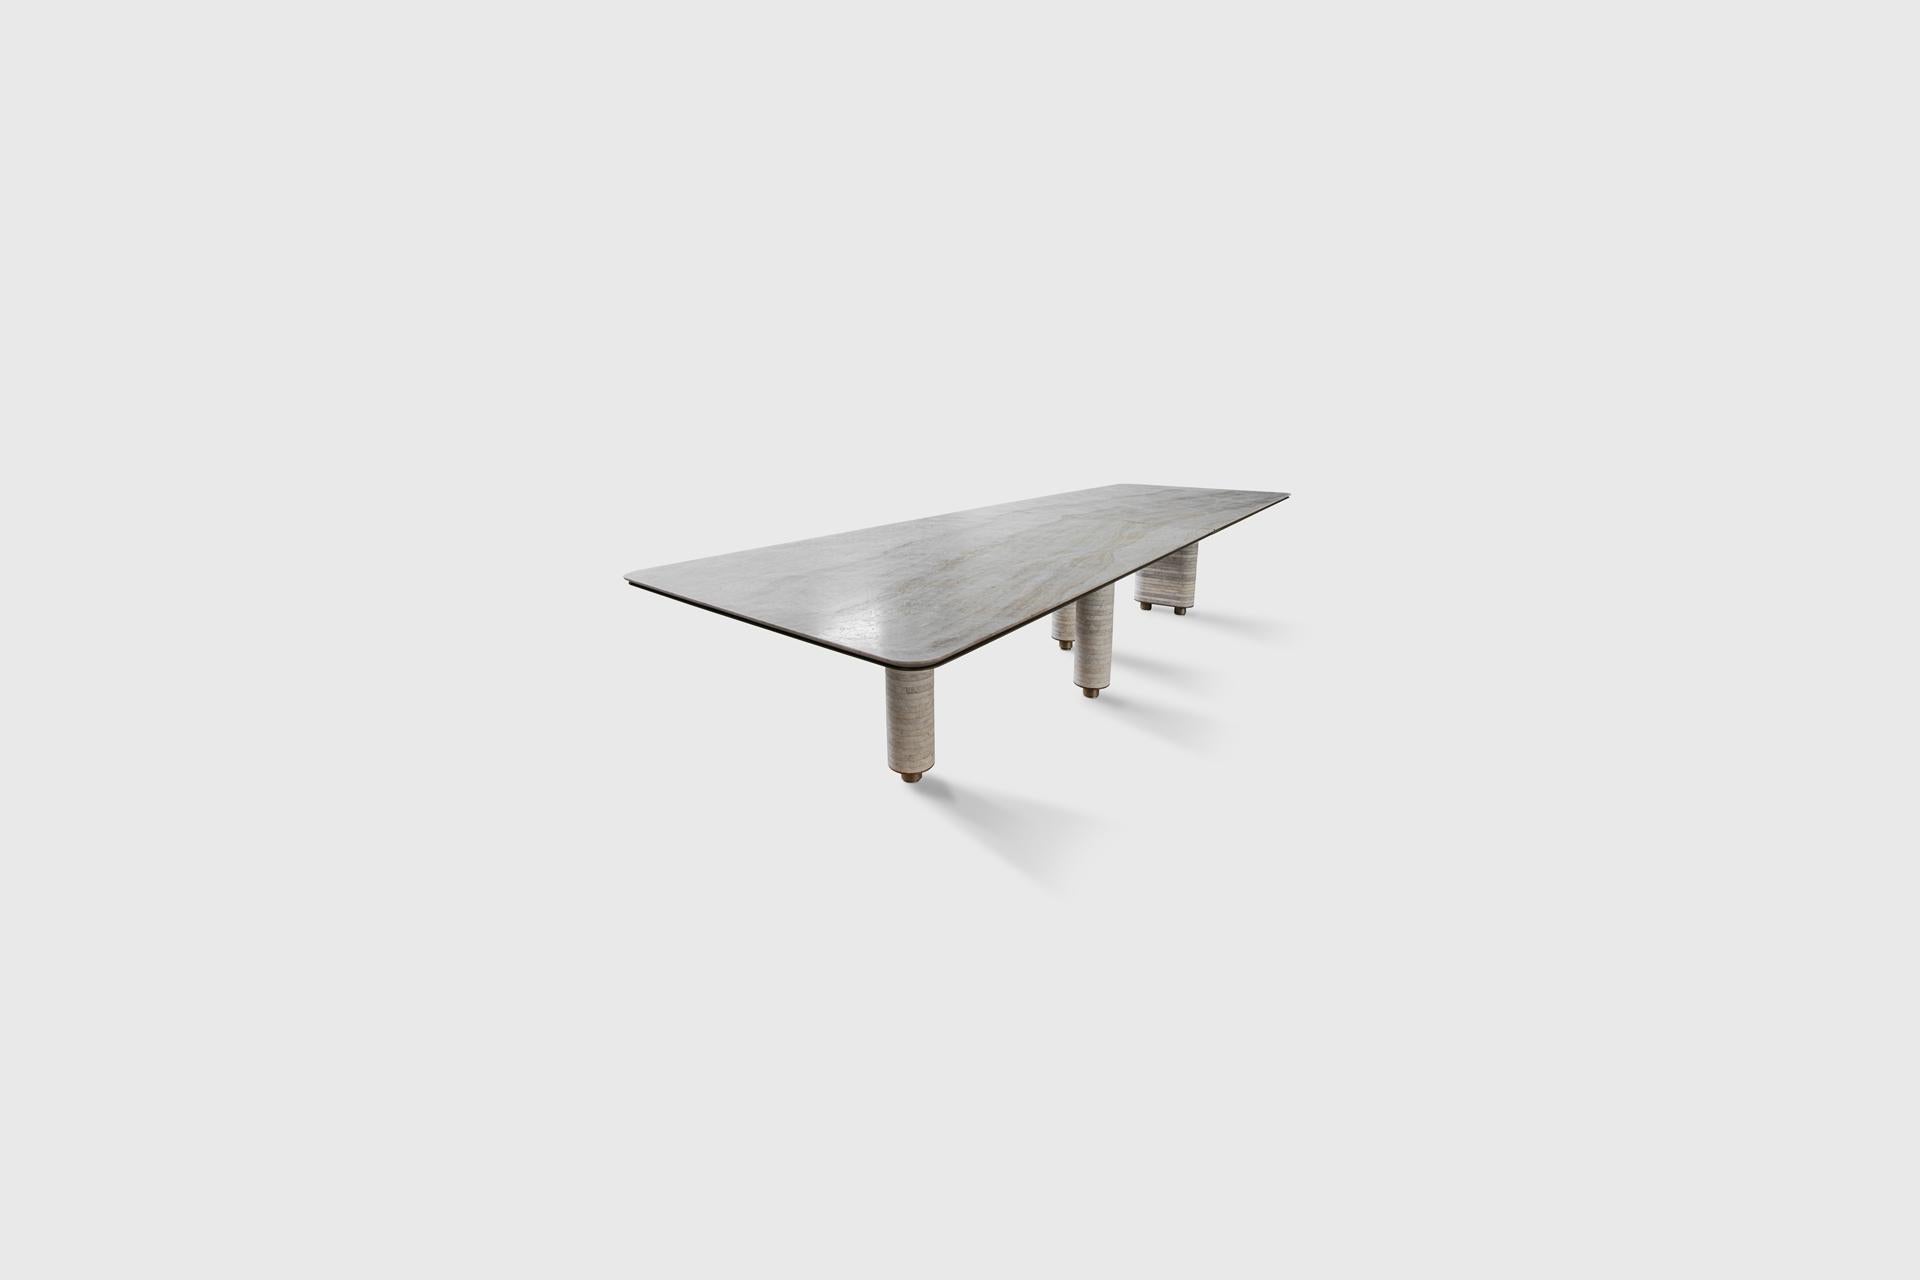 Aro dining table by Atra Design.
Dimensions: D 280 x W 110 x H 73.6 cm
Materials: silk georgette marble top and sculptural base of taj mahal stone rings with brass details.
Also available in different stones: Calacatta Viola, Rhino Quartz,